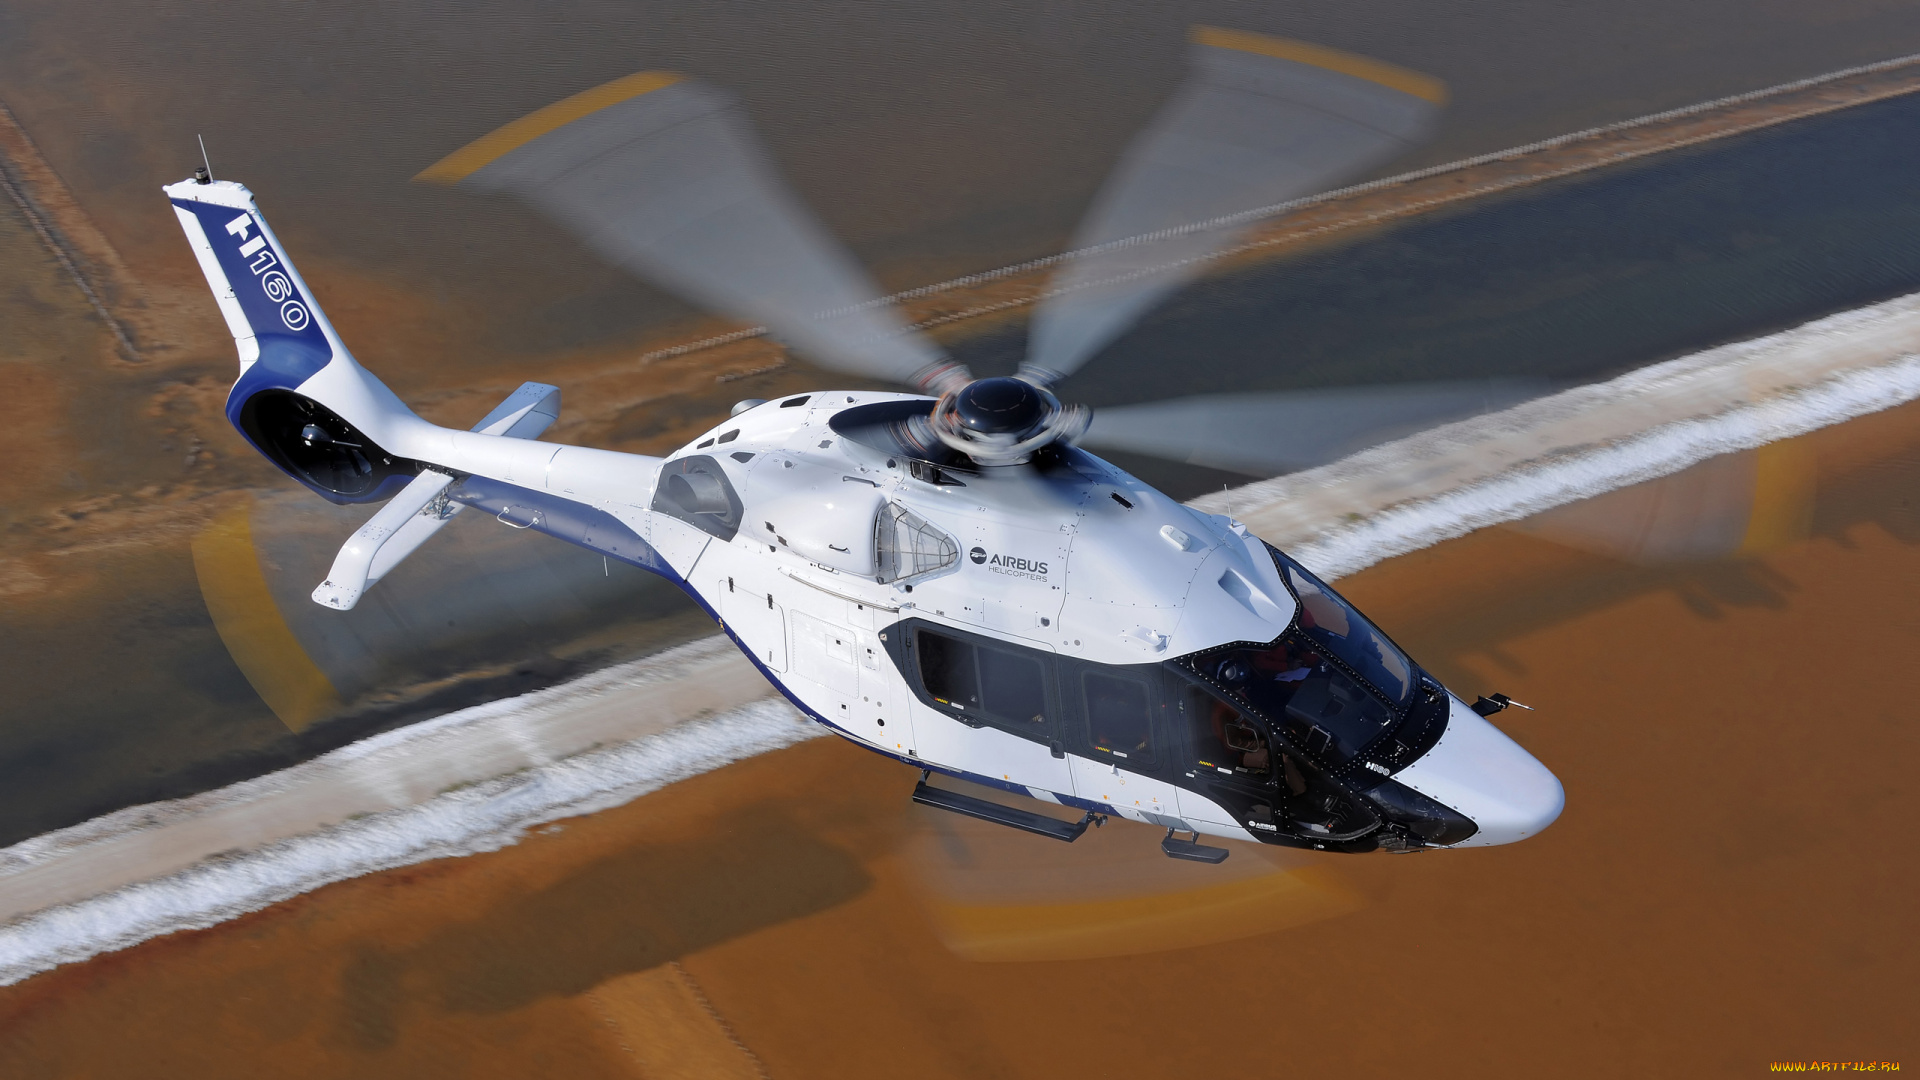 airbus, helicopters, h160, авиация, вертолёты, небо, вертолет, airbus, helicopters, h160